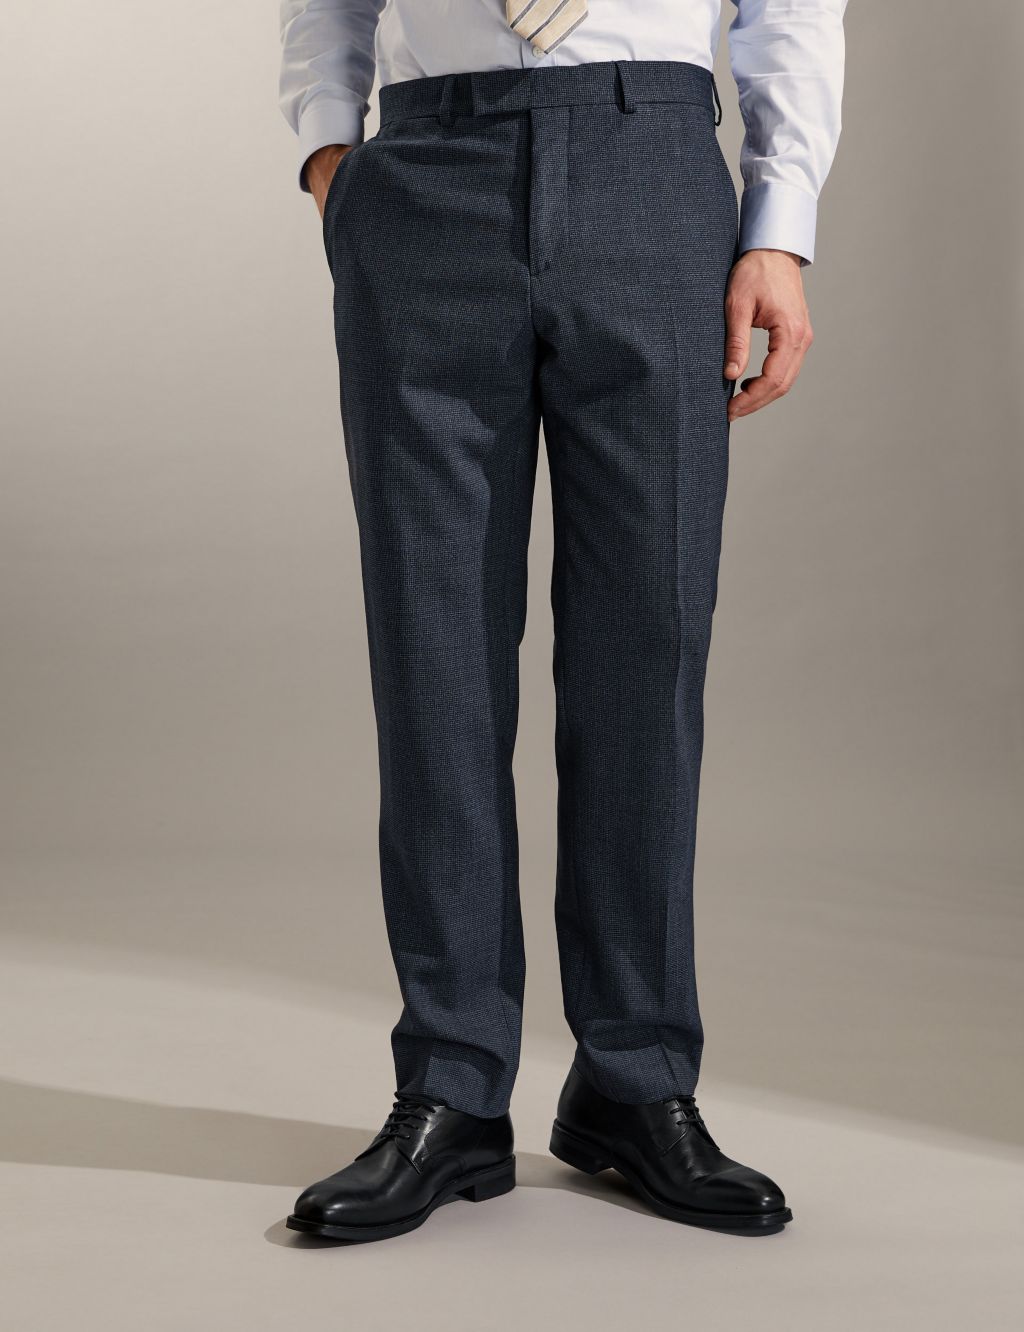 Tailored Fit Bi-Stretch Puppytooth Trousers image 3